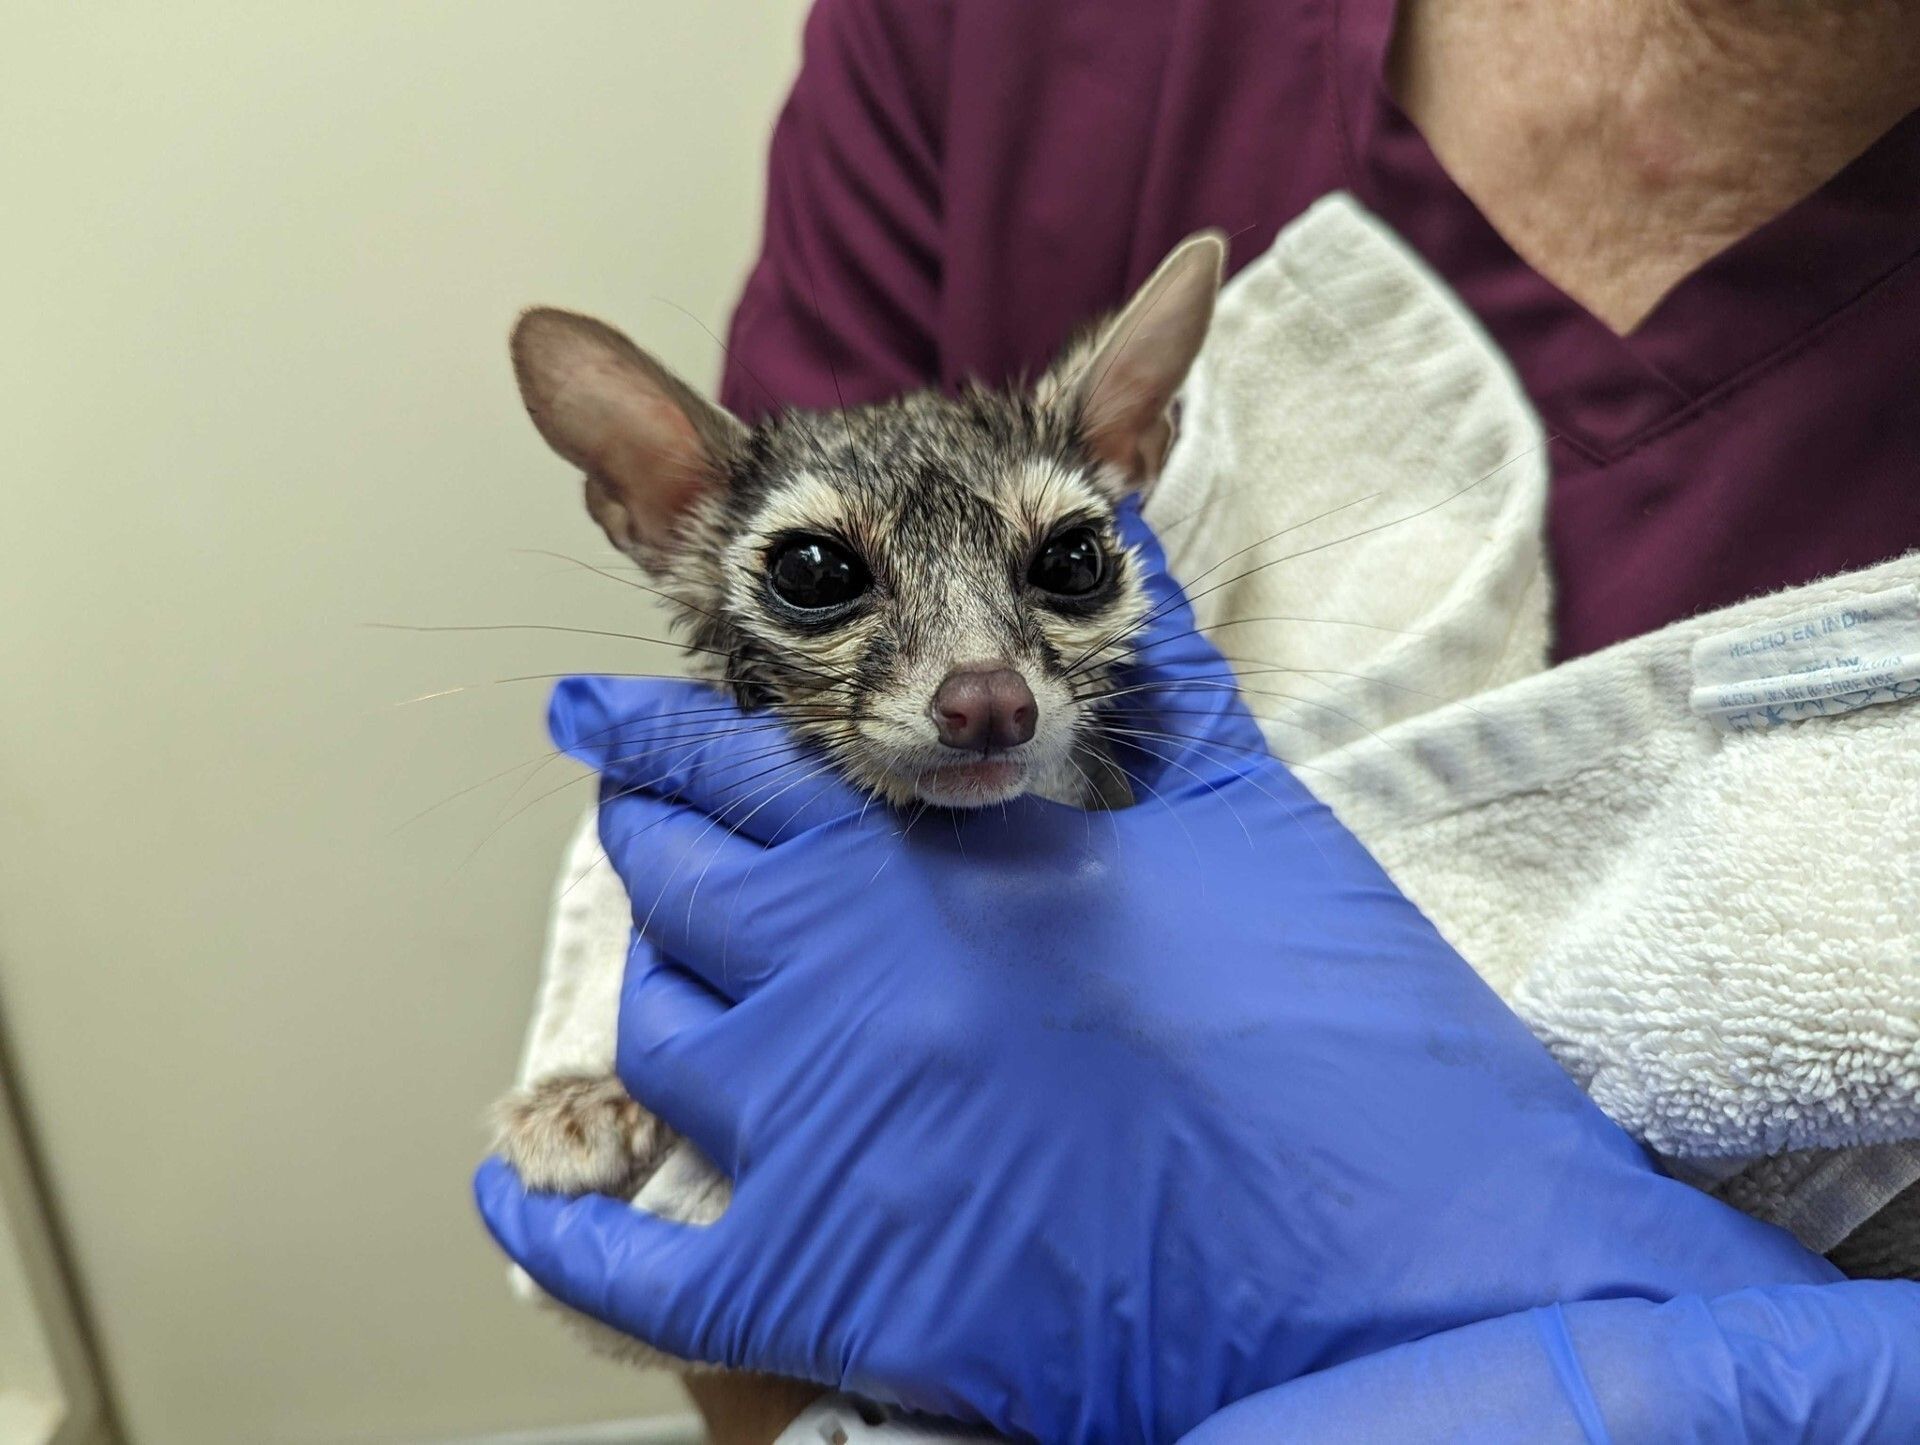 A rescued ringtail sits in a vet techs gloved hands after a thorough intake exam